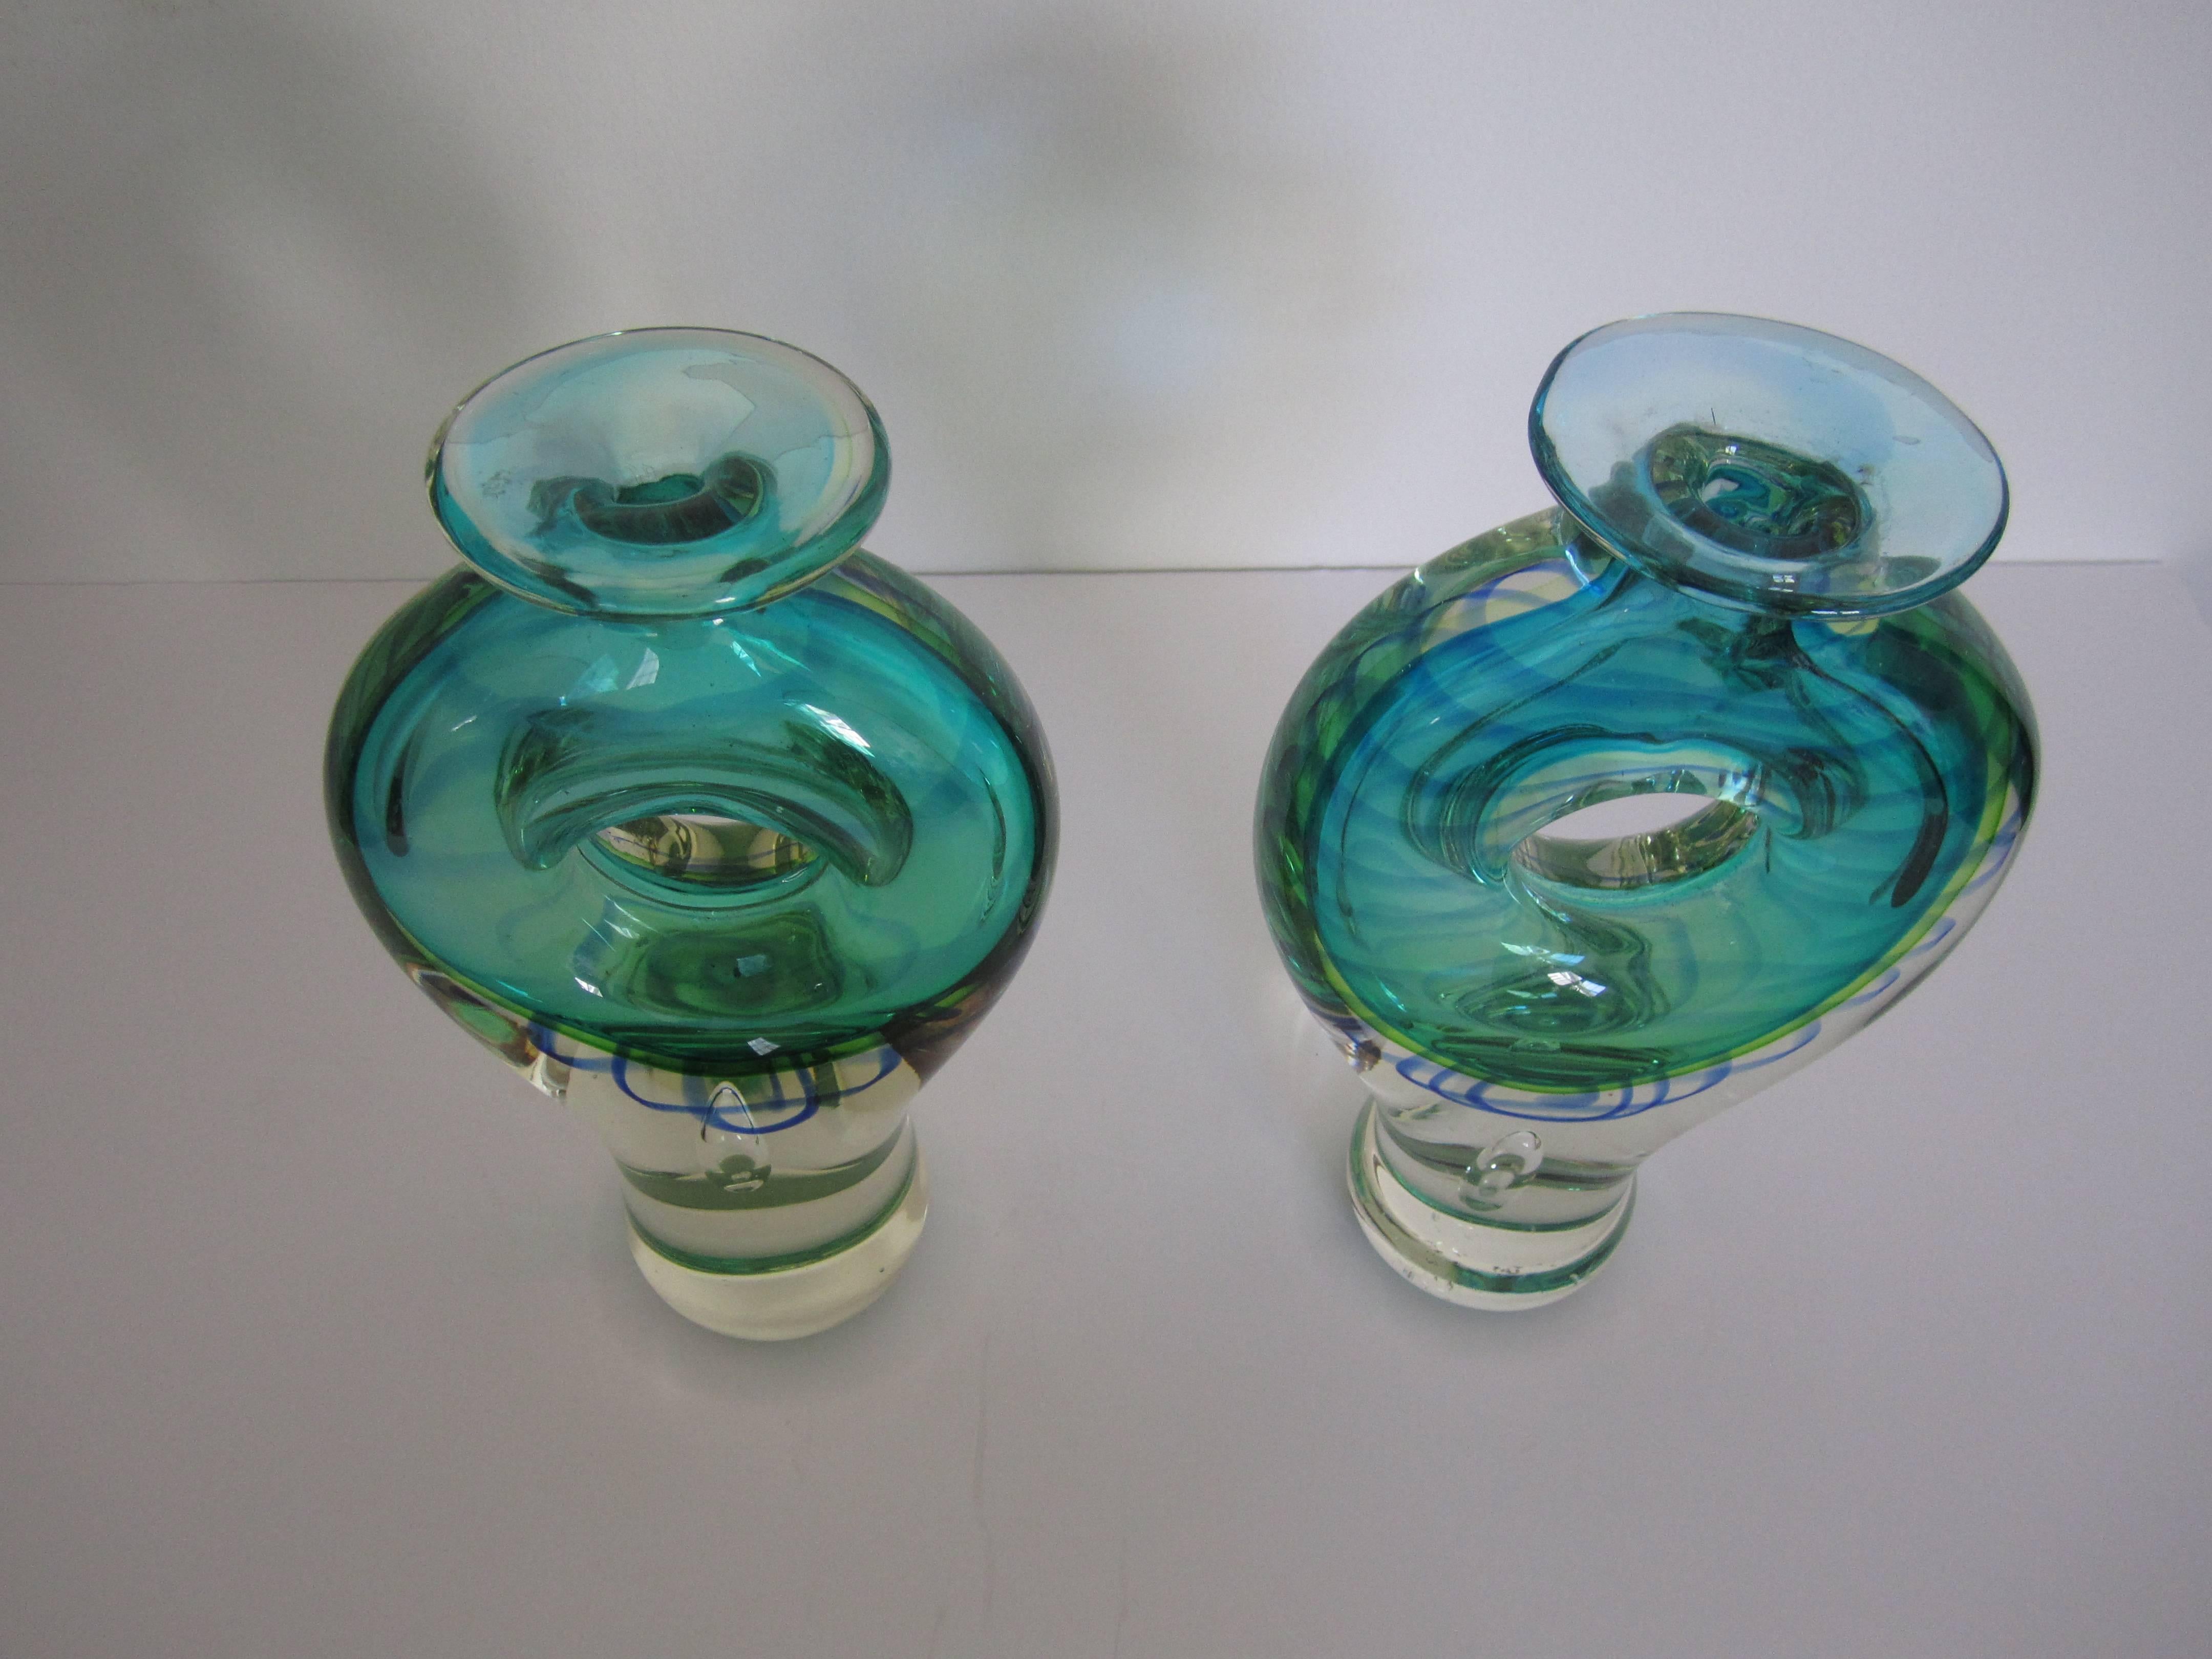 Pair of Modern Blue and Green Art Glass Vessels or Vases 3